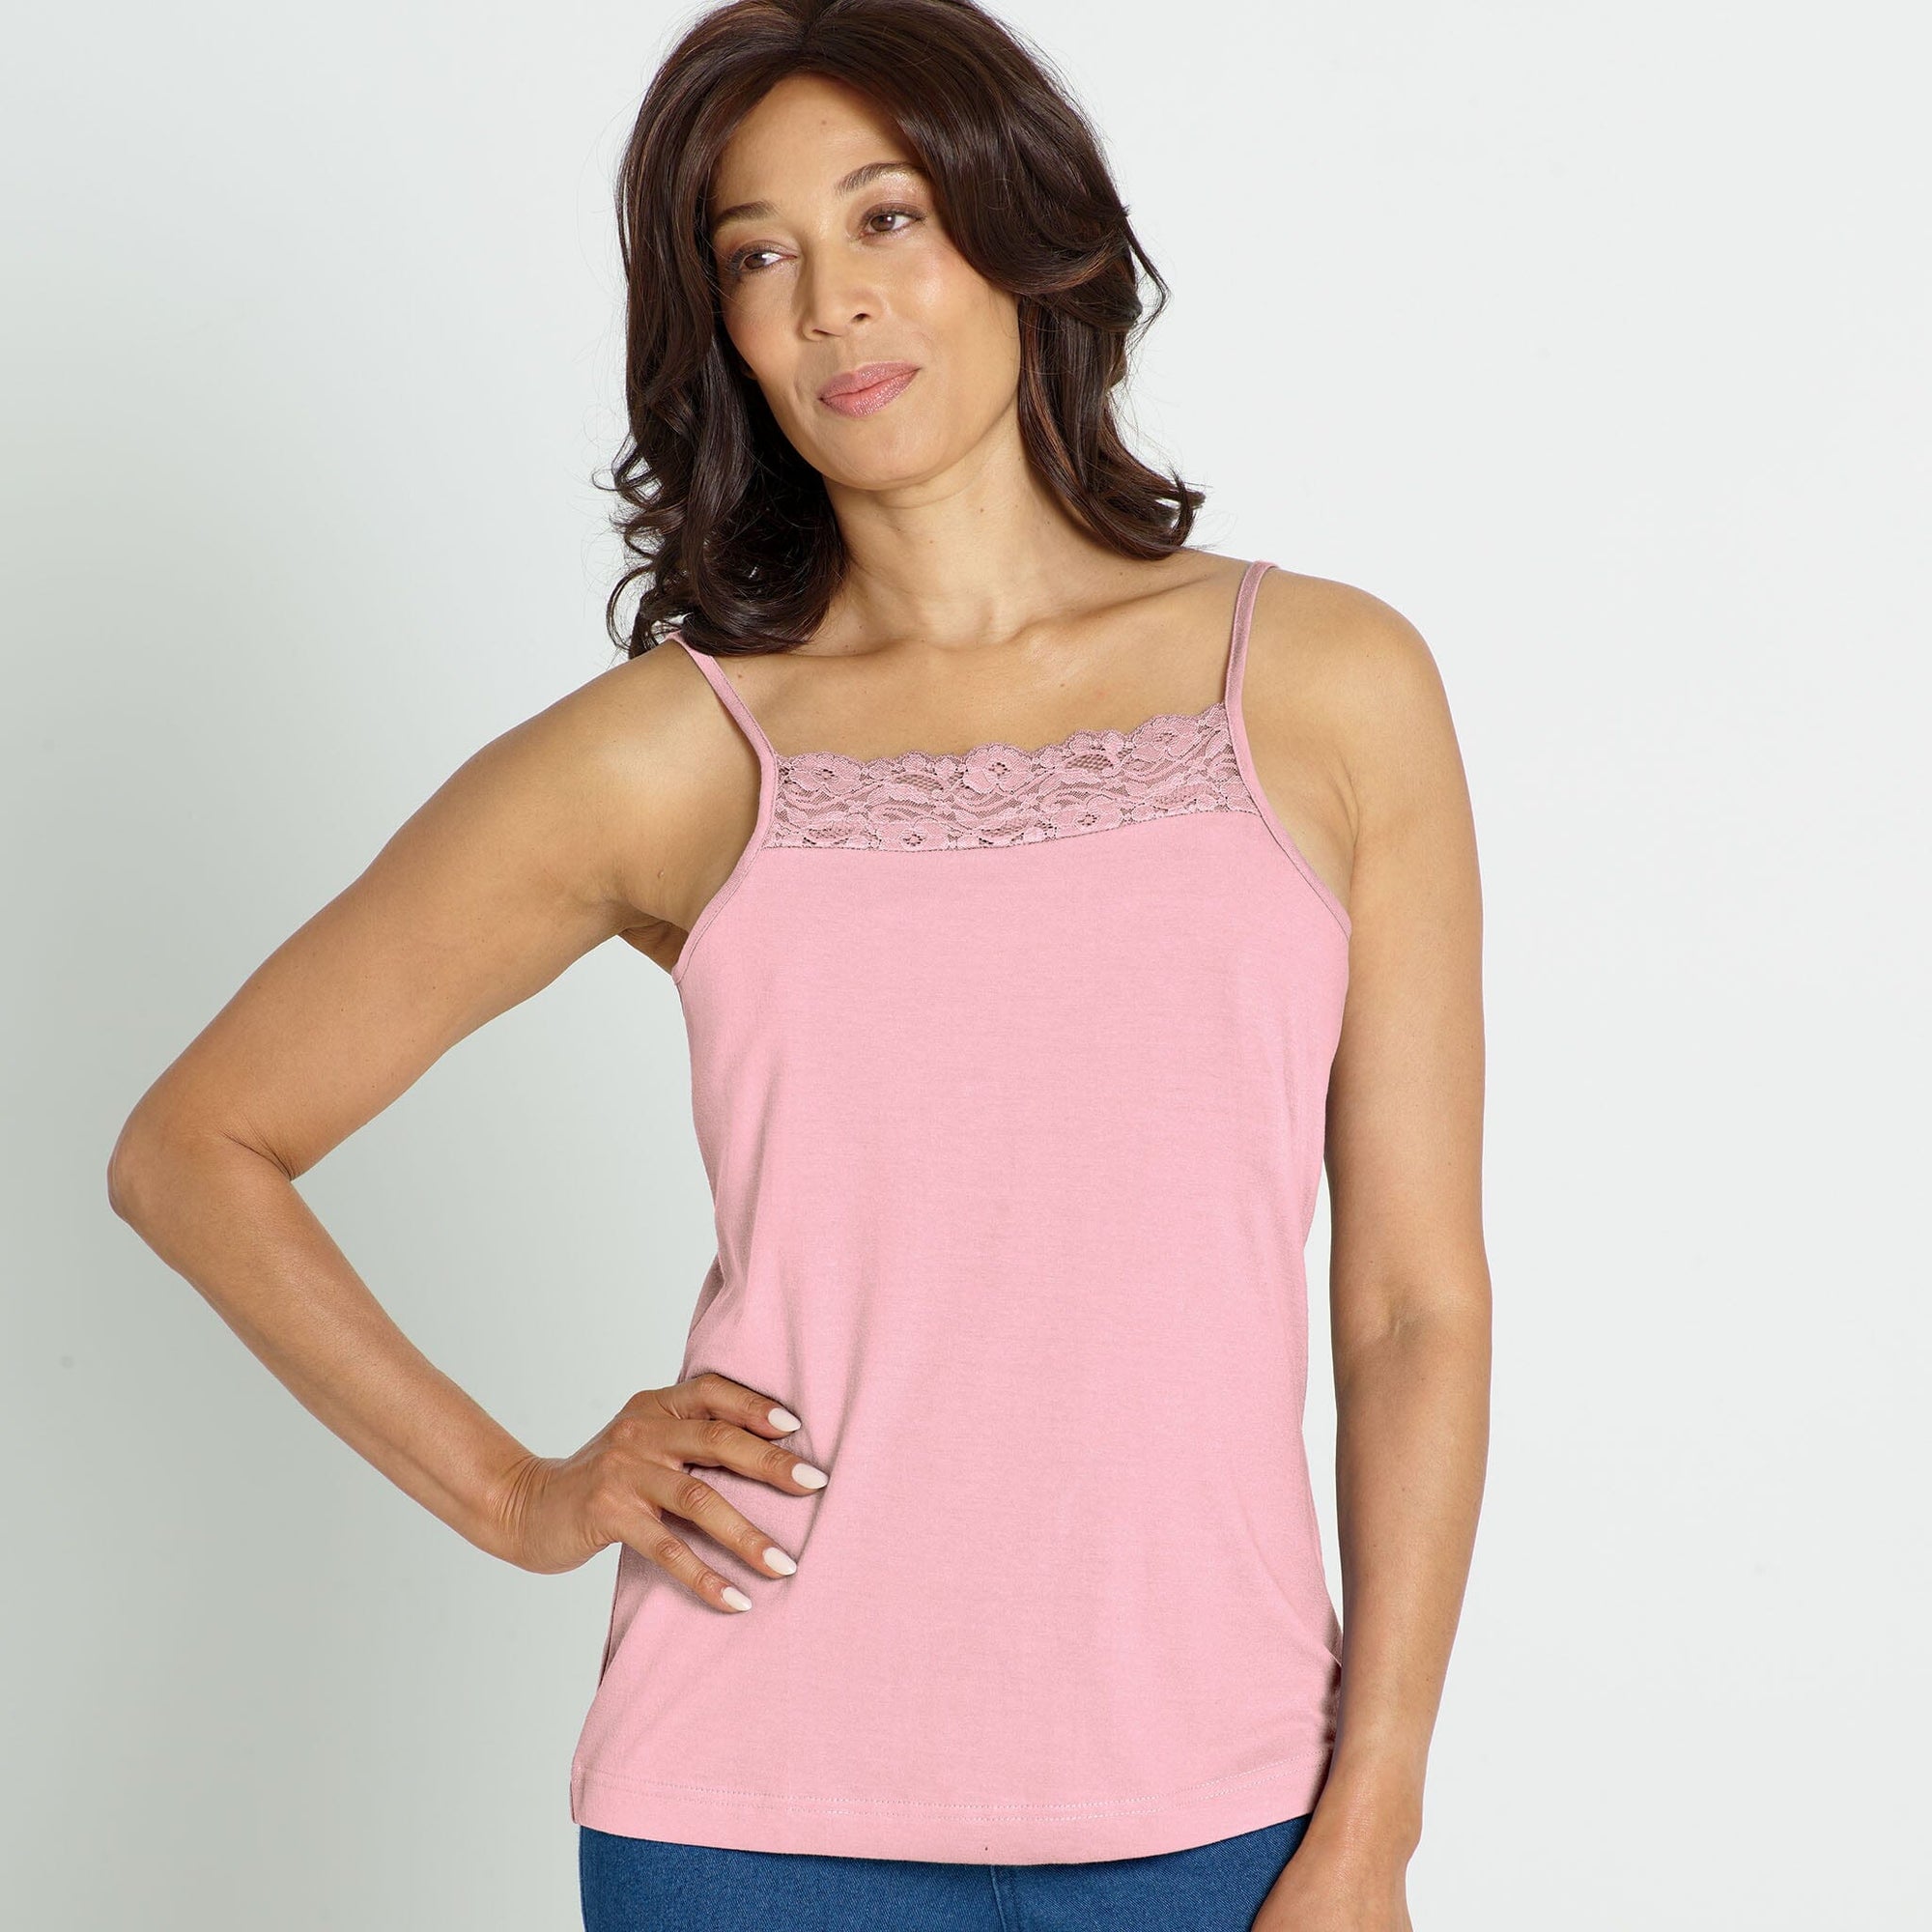 Front view of the #9408 Cool Comfort Pocketed  Lace Trim Camisole shown in pink.